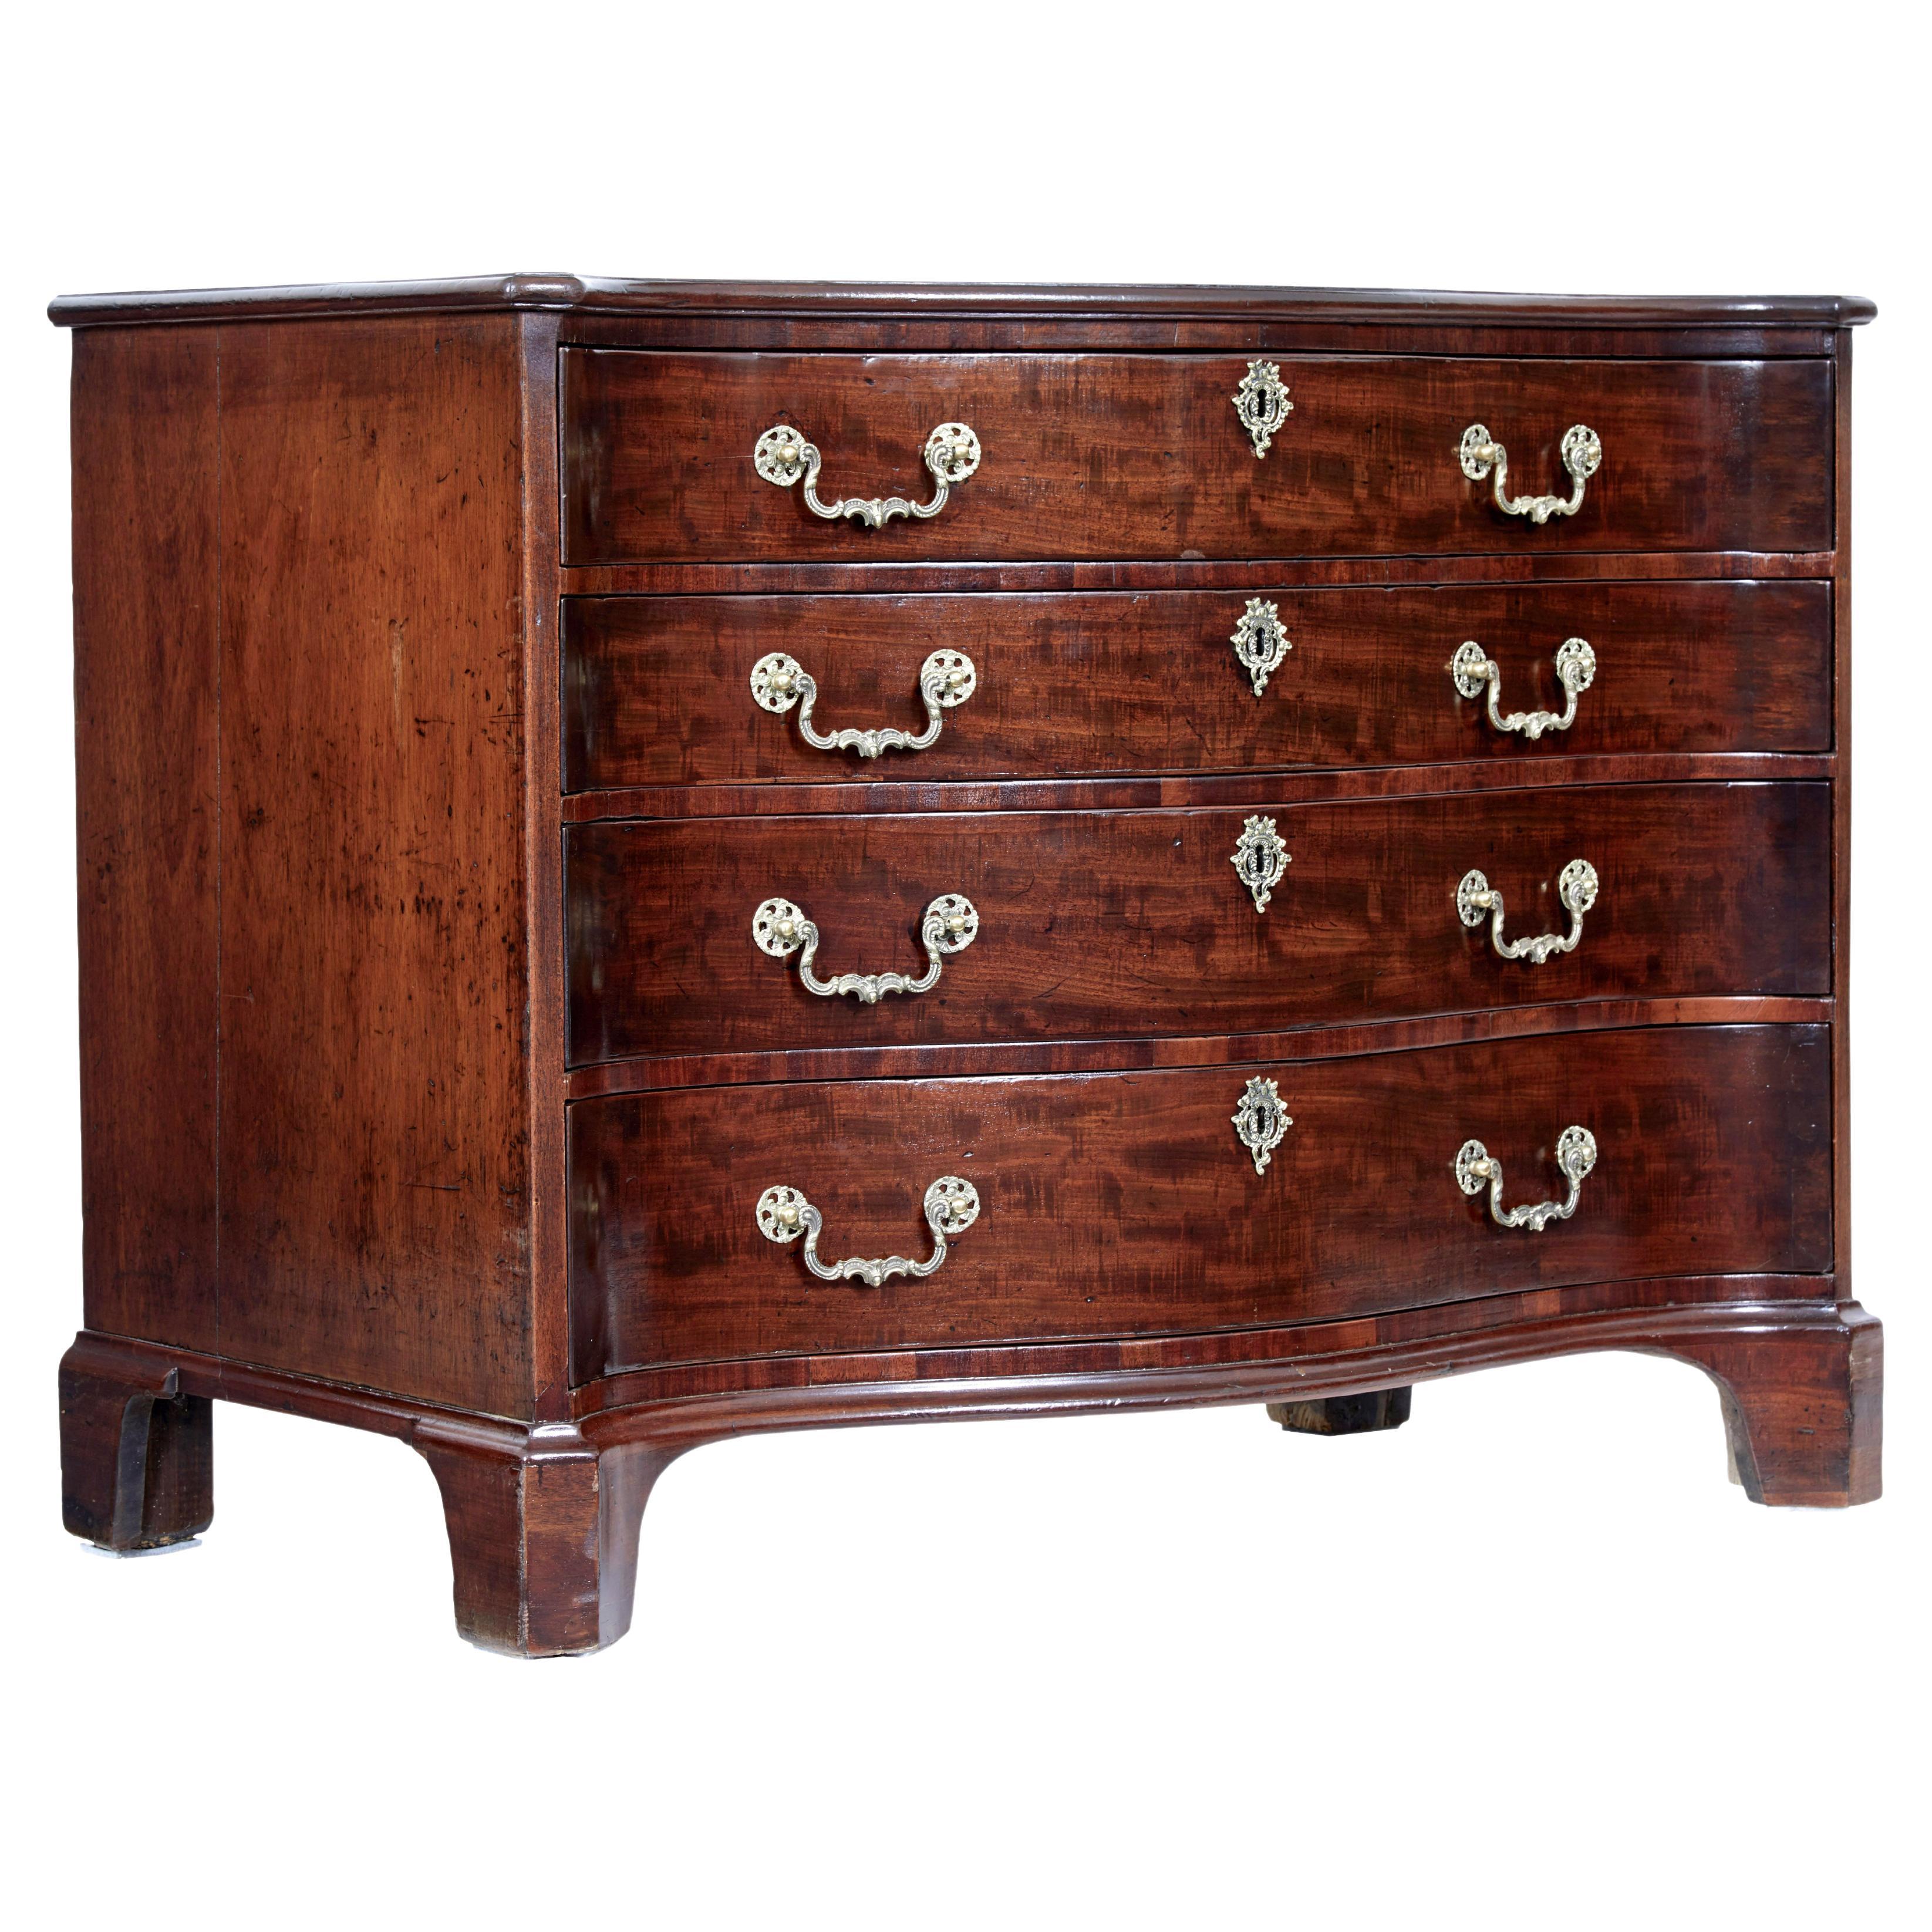 18th century Georgian mahogany serpentine chest of drawers For Sale